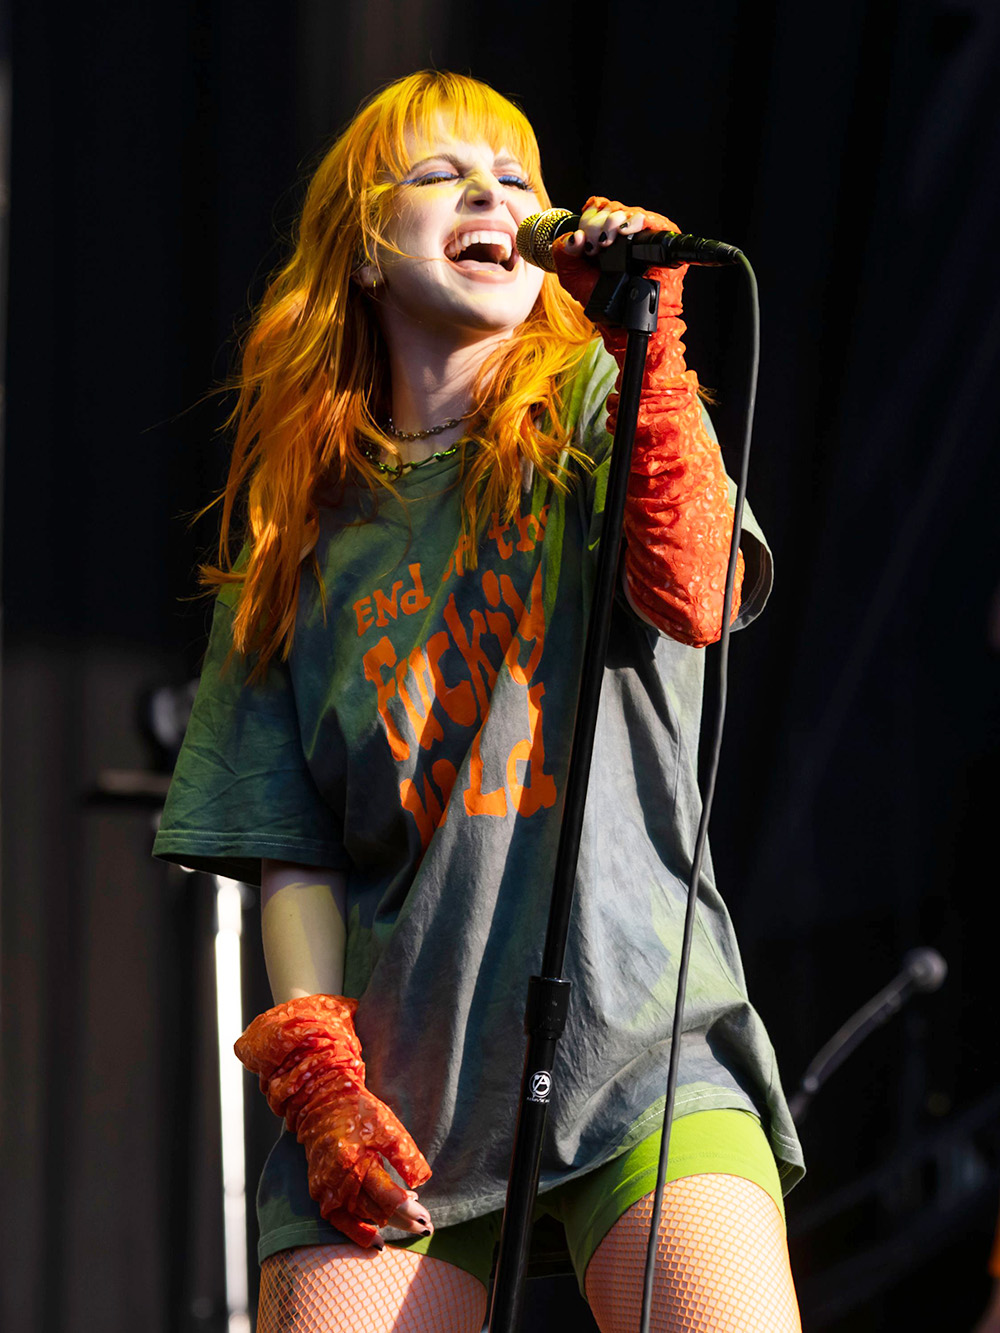 Hayley Williams, lead singer of Paramore, performs at the Austin City Limits Music Festival on October 9, 2022 in Austin, Texas Hayley Williams, lead singer of Paramore, performs in Austin City. Limits Music Festival, Zilker Park, Austin, Austin, United States - October 09, 2022